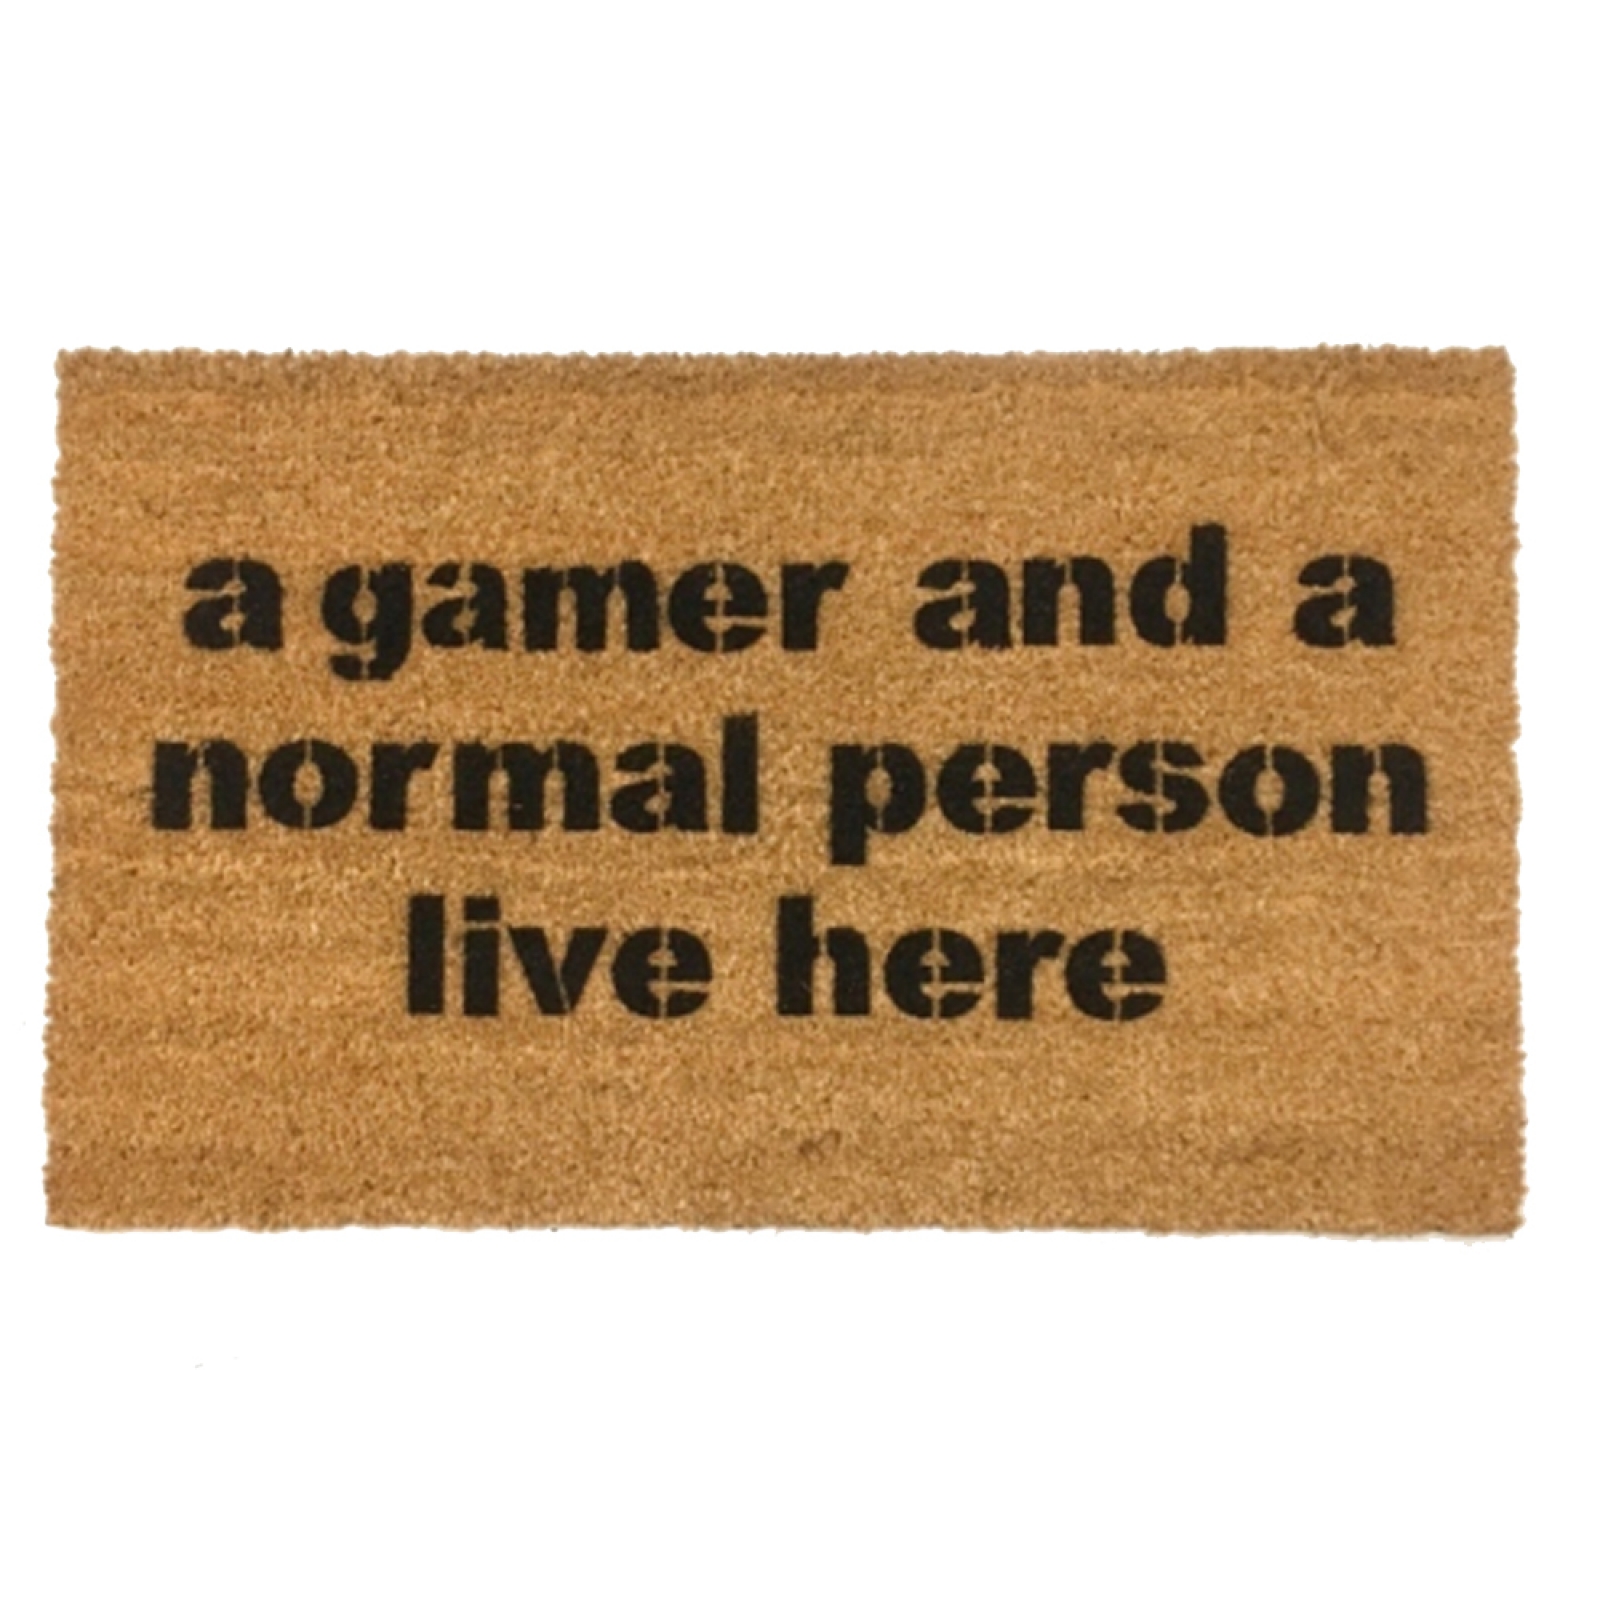 You live here long. Doormat of Introvert person.